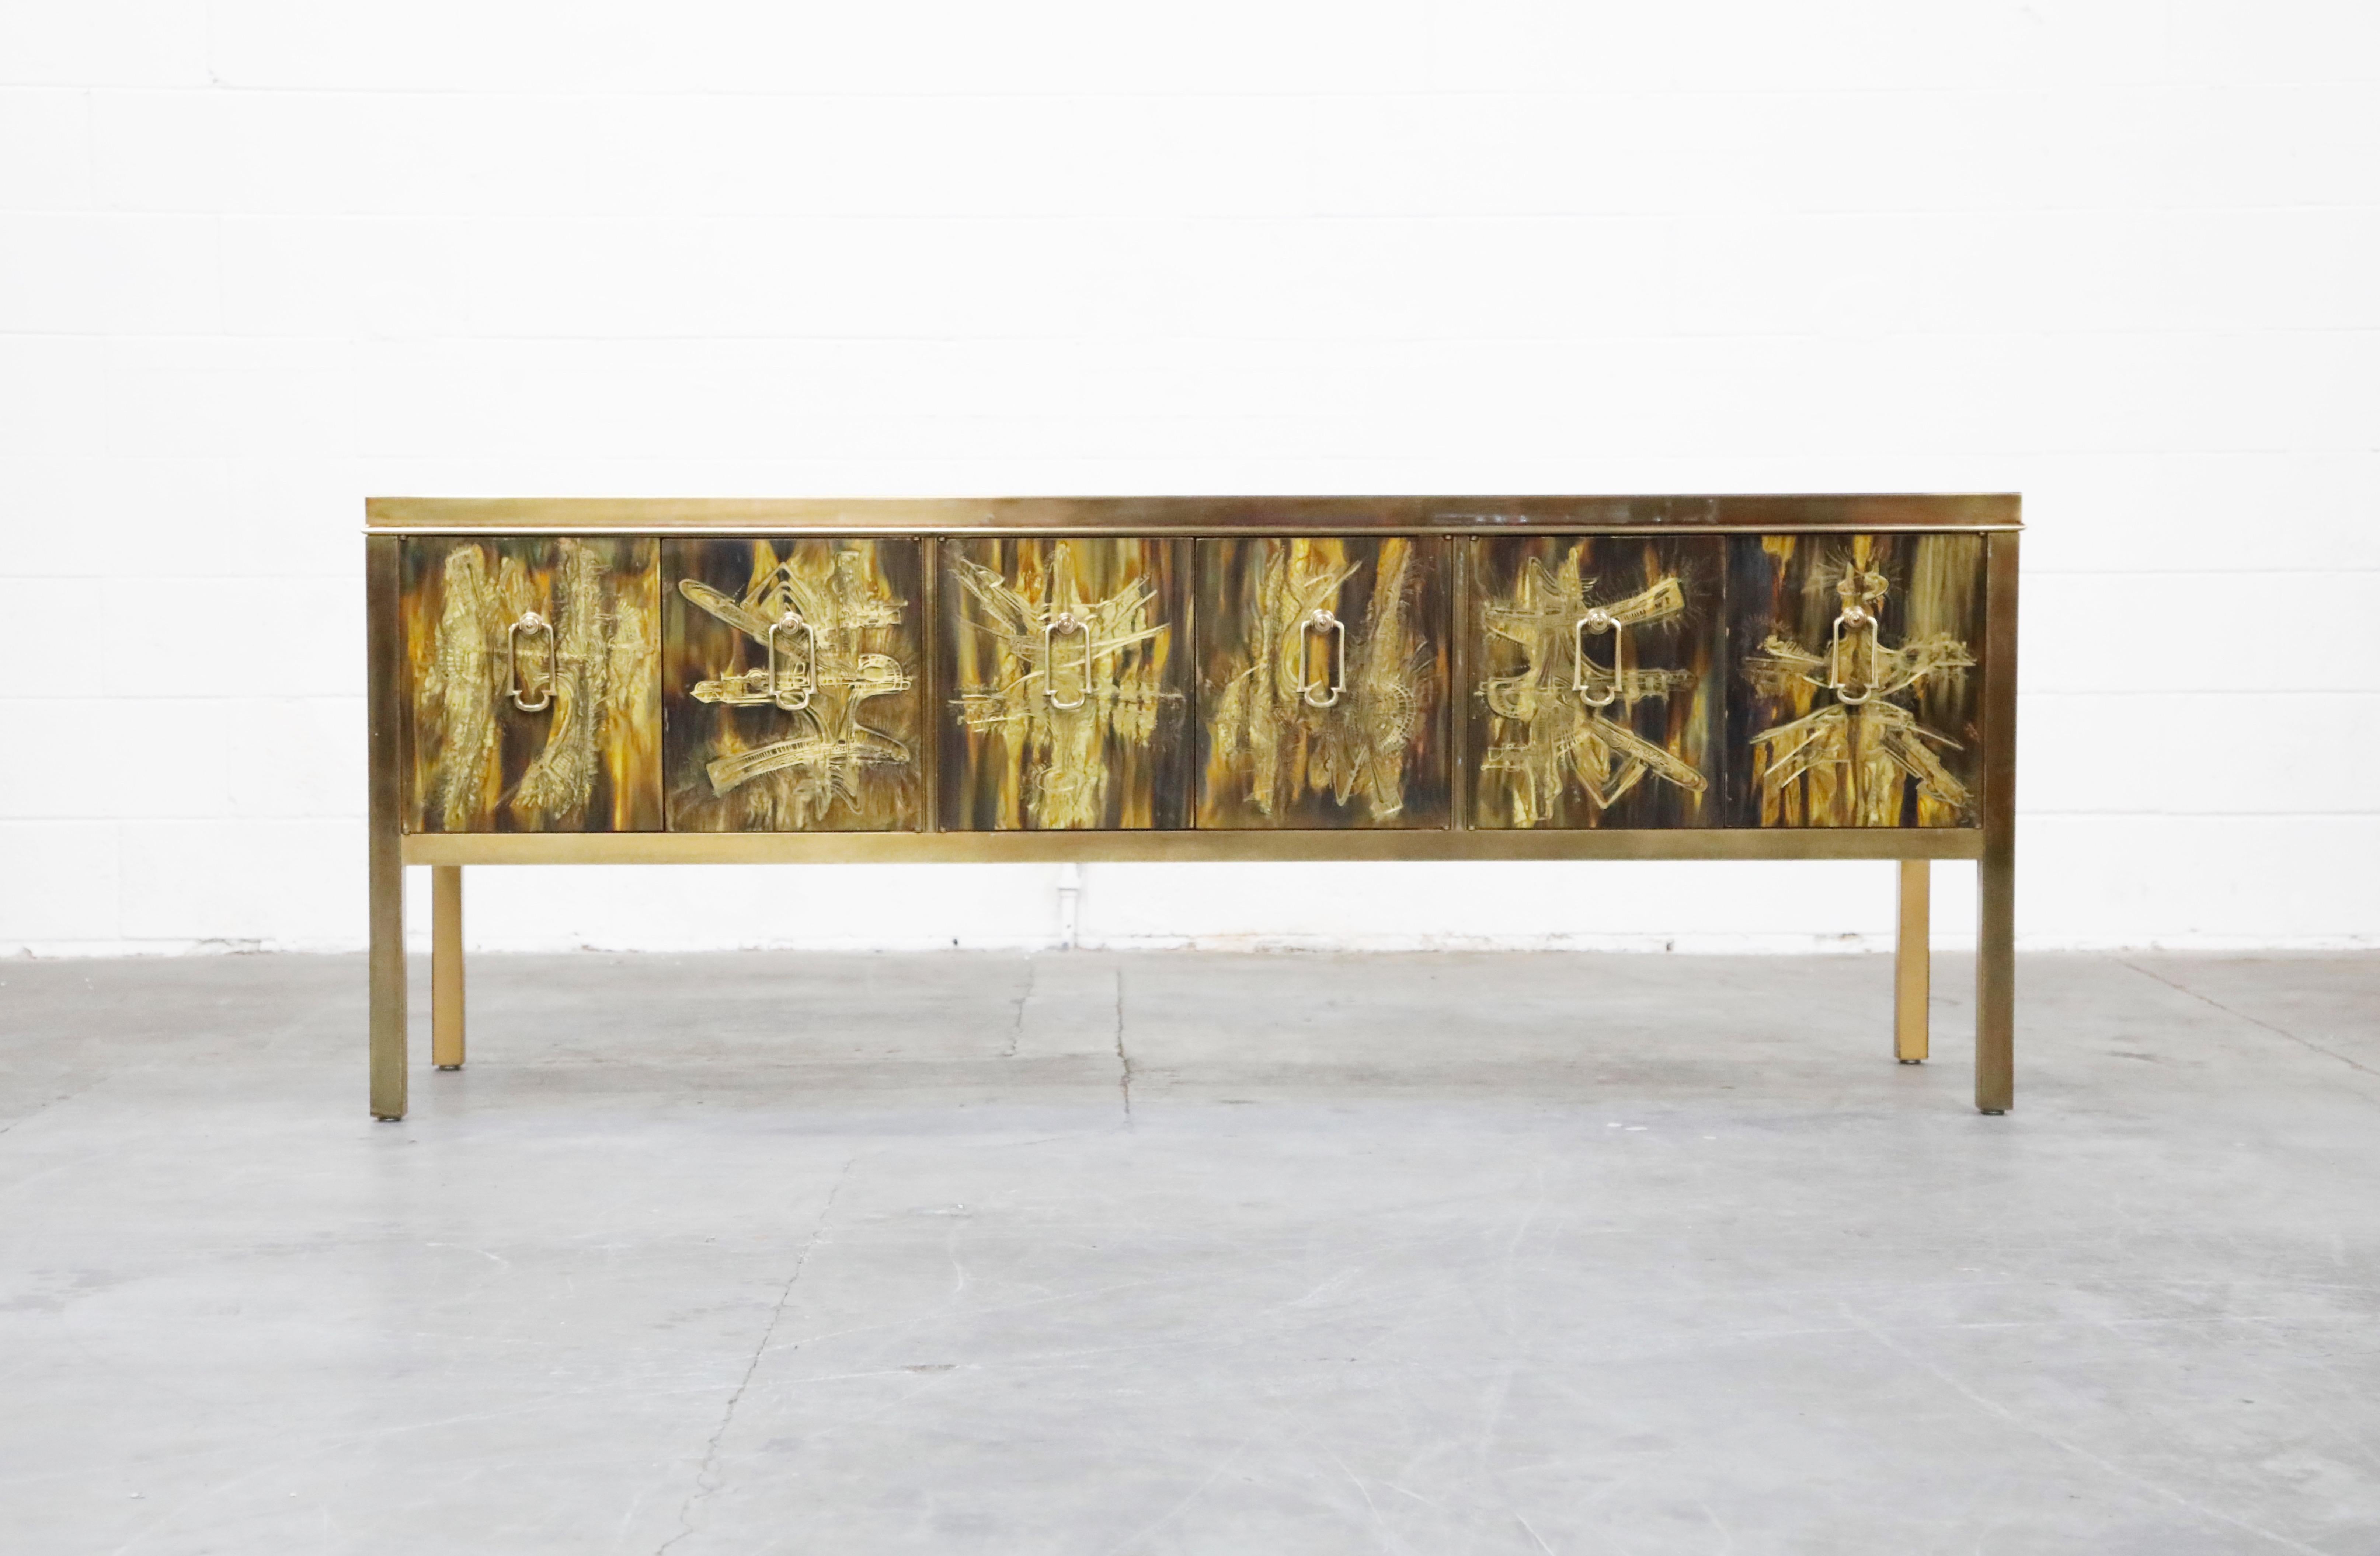 This incredible acid etched brass credenza was designed by Bernhard Rohne and produced by Mastercraft in the 1970s. Exquisite acid-etched artwork on the top, sides and front door panels with patinated brass trim and legs. Six doors and door pulls